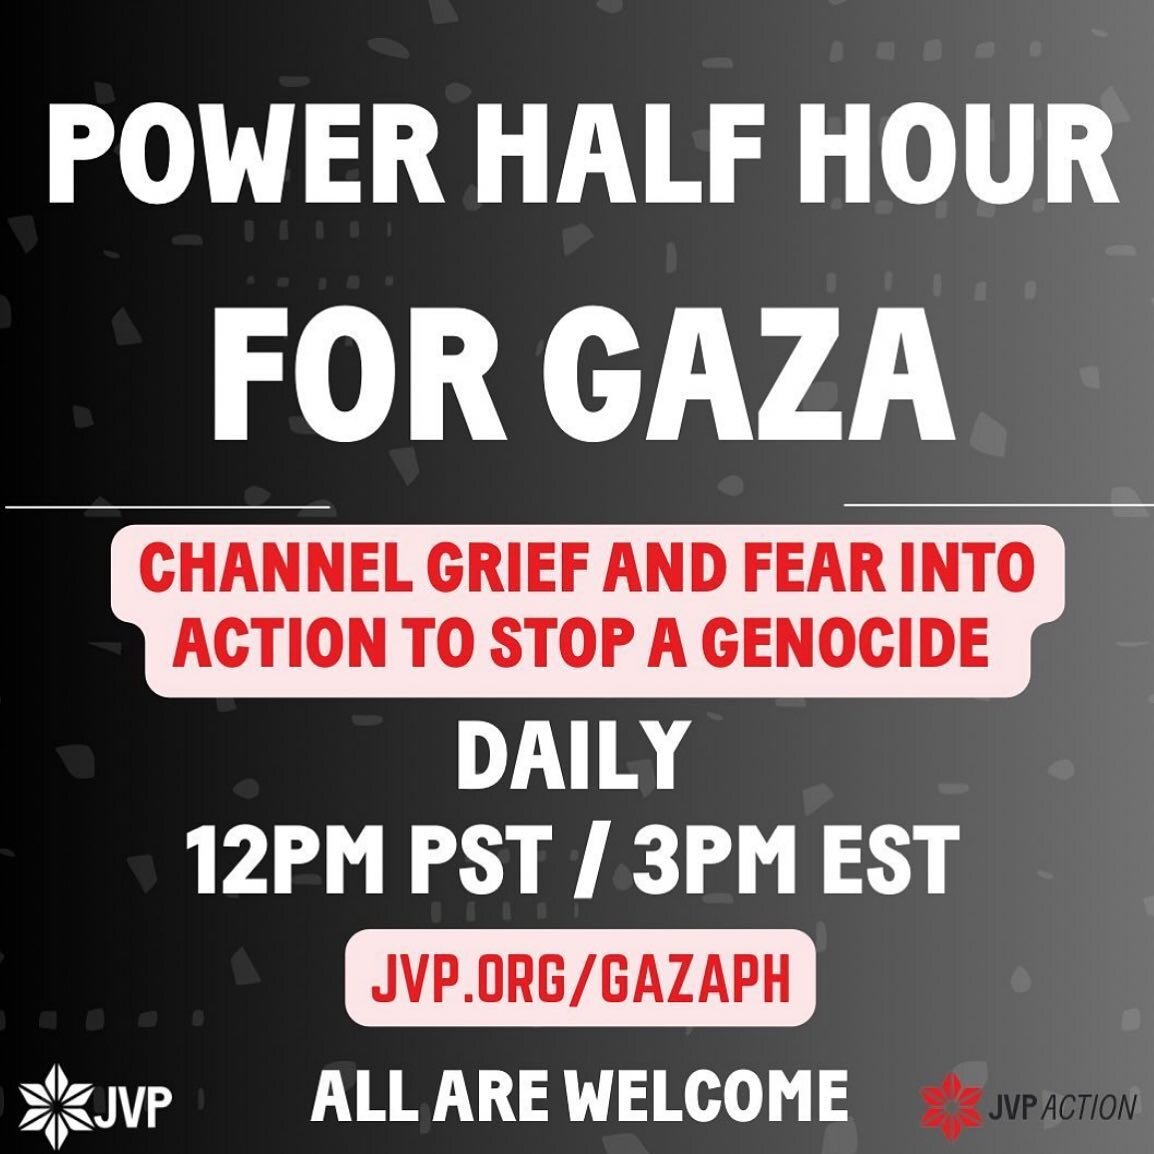 Jewish Voices For Peace @jewishvoiceforpeace host a power half hour every week day. 

&bull; Updates on what&rsquo;s happening

&bull; Small action steps we can take that day

&bull; Community holding, grief tending, justice celebrating

jvp.org/gaza